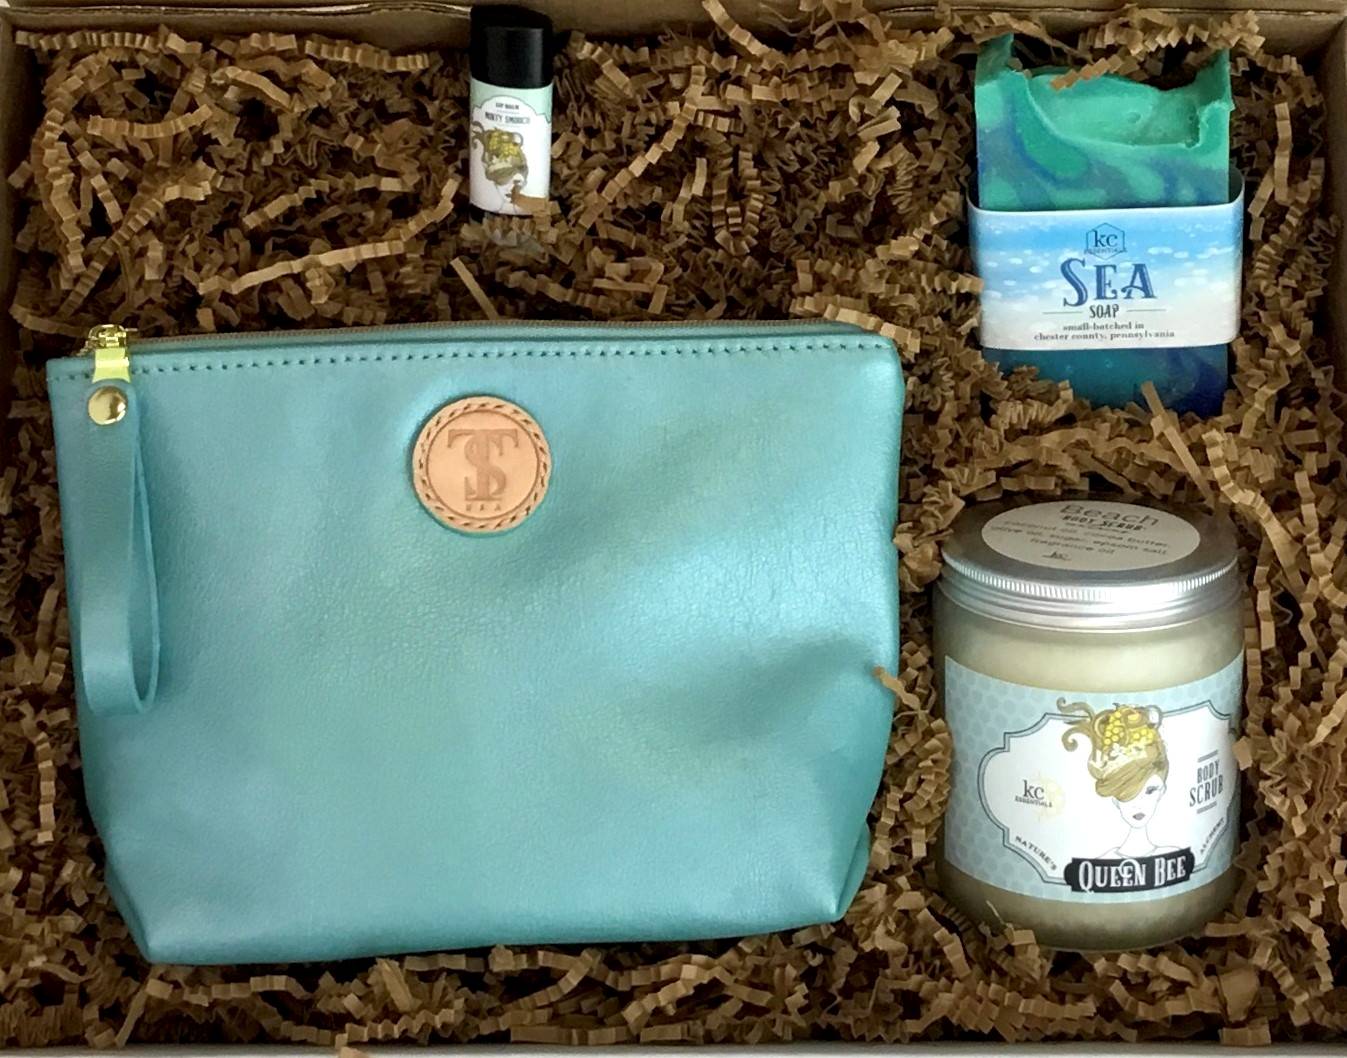 Town &amp; Shore Handcrafted Serenity Gift set featuring T5 Leather bath kit and brush bag shown in turqouise calfskin leather. KC Essentials artisan made vegan bar soap, essential oils body scrub and soothing lip balm. Arranged in gift box with sustainable eco-friendly craft crinkle paper.